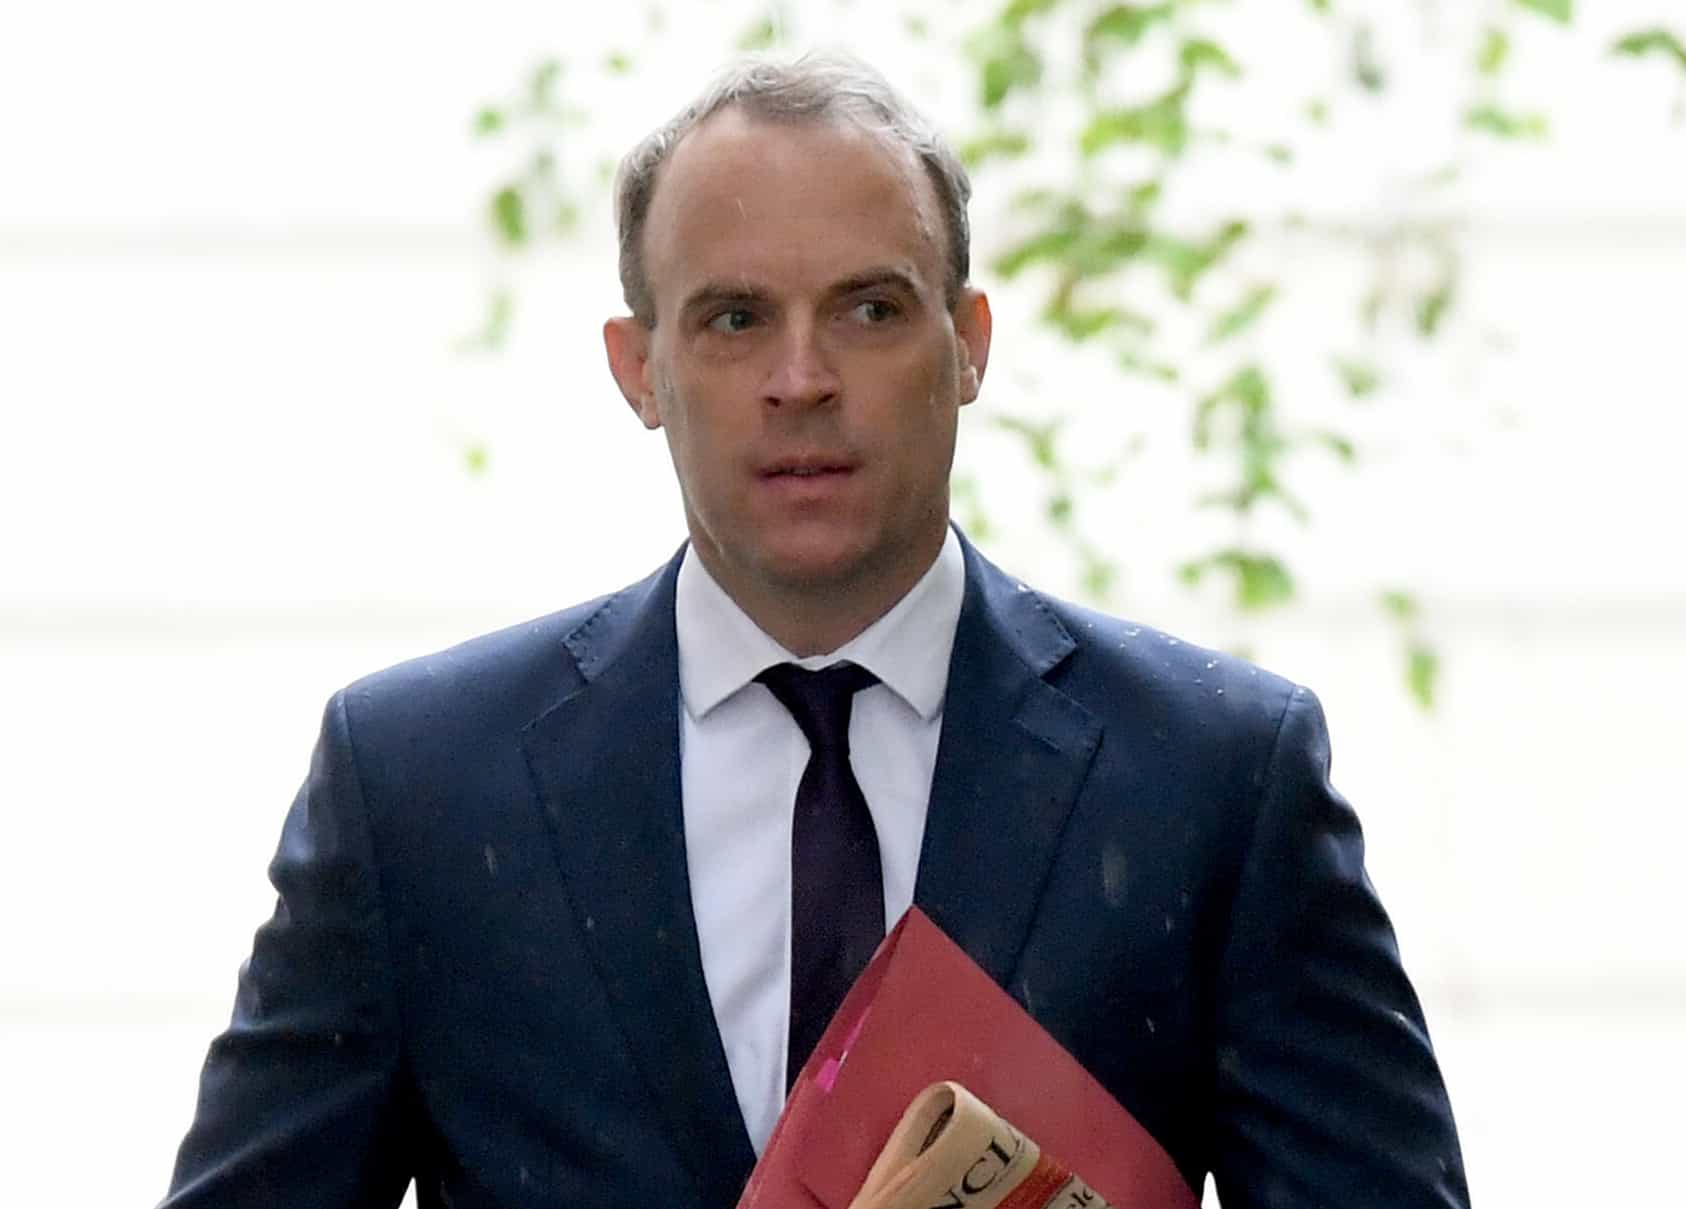 Raab trying to bully the bullying inquiry is the ending we could have all predicted